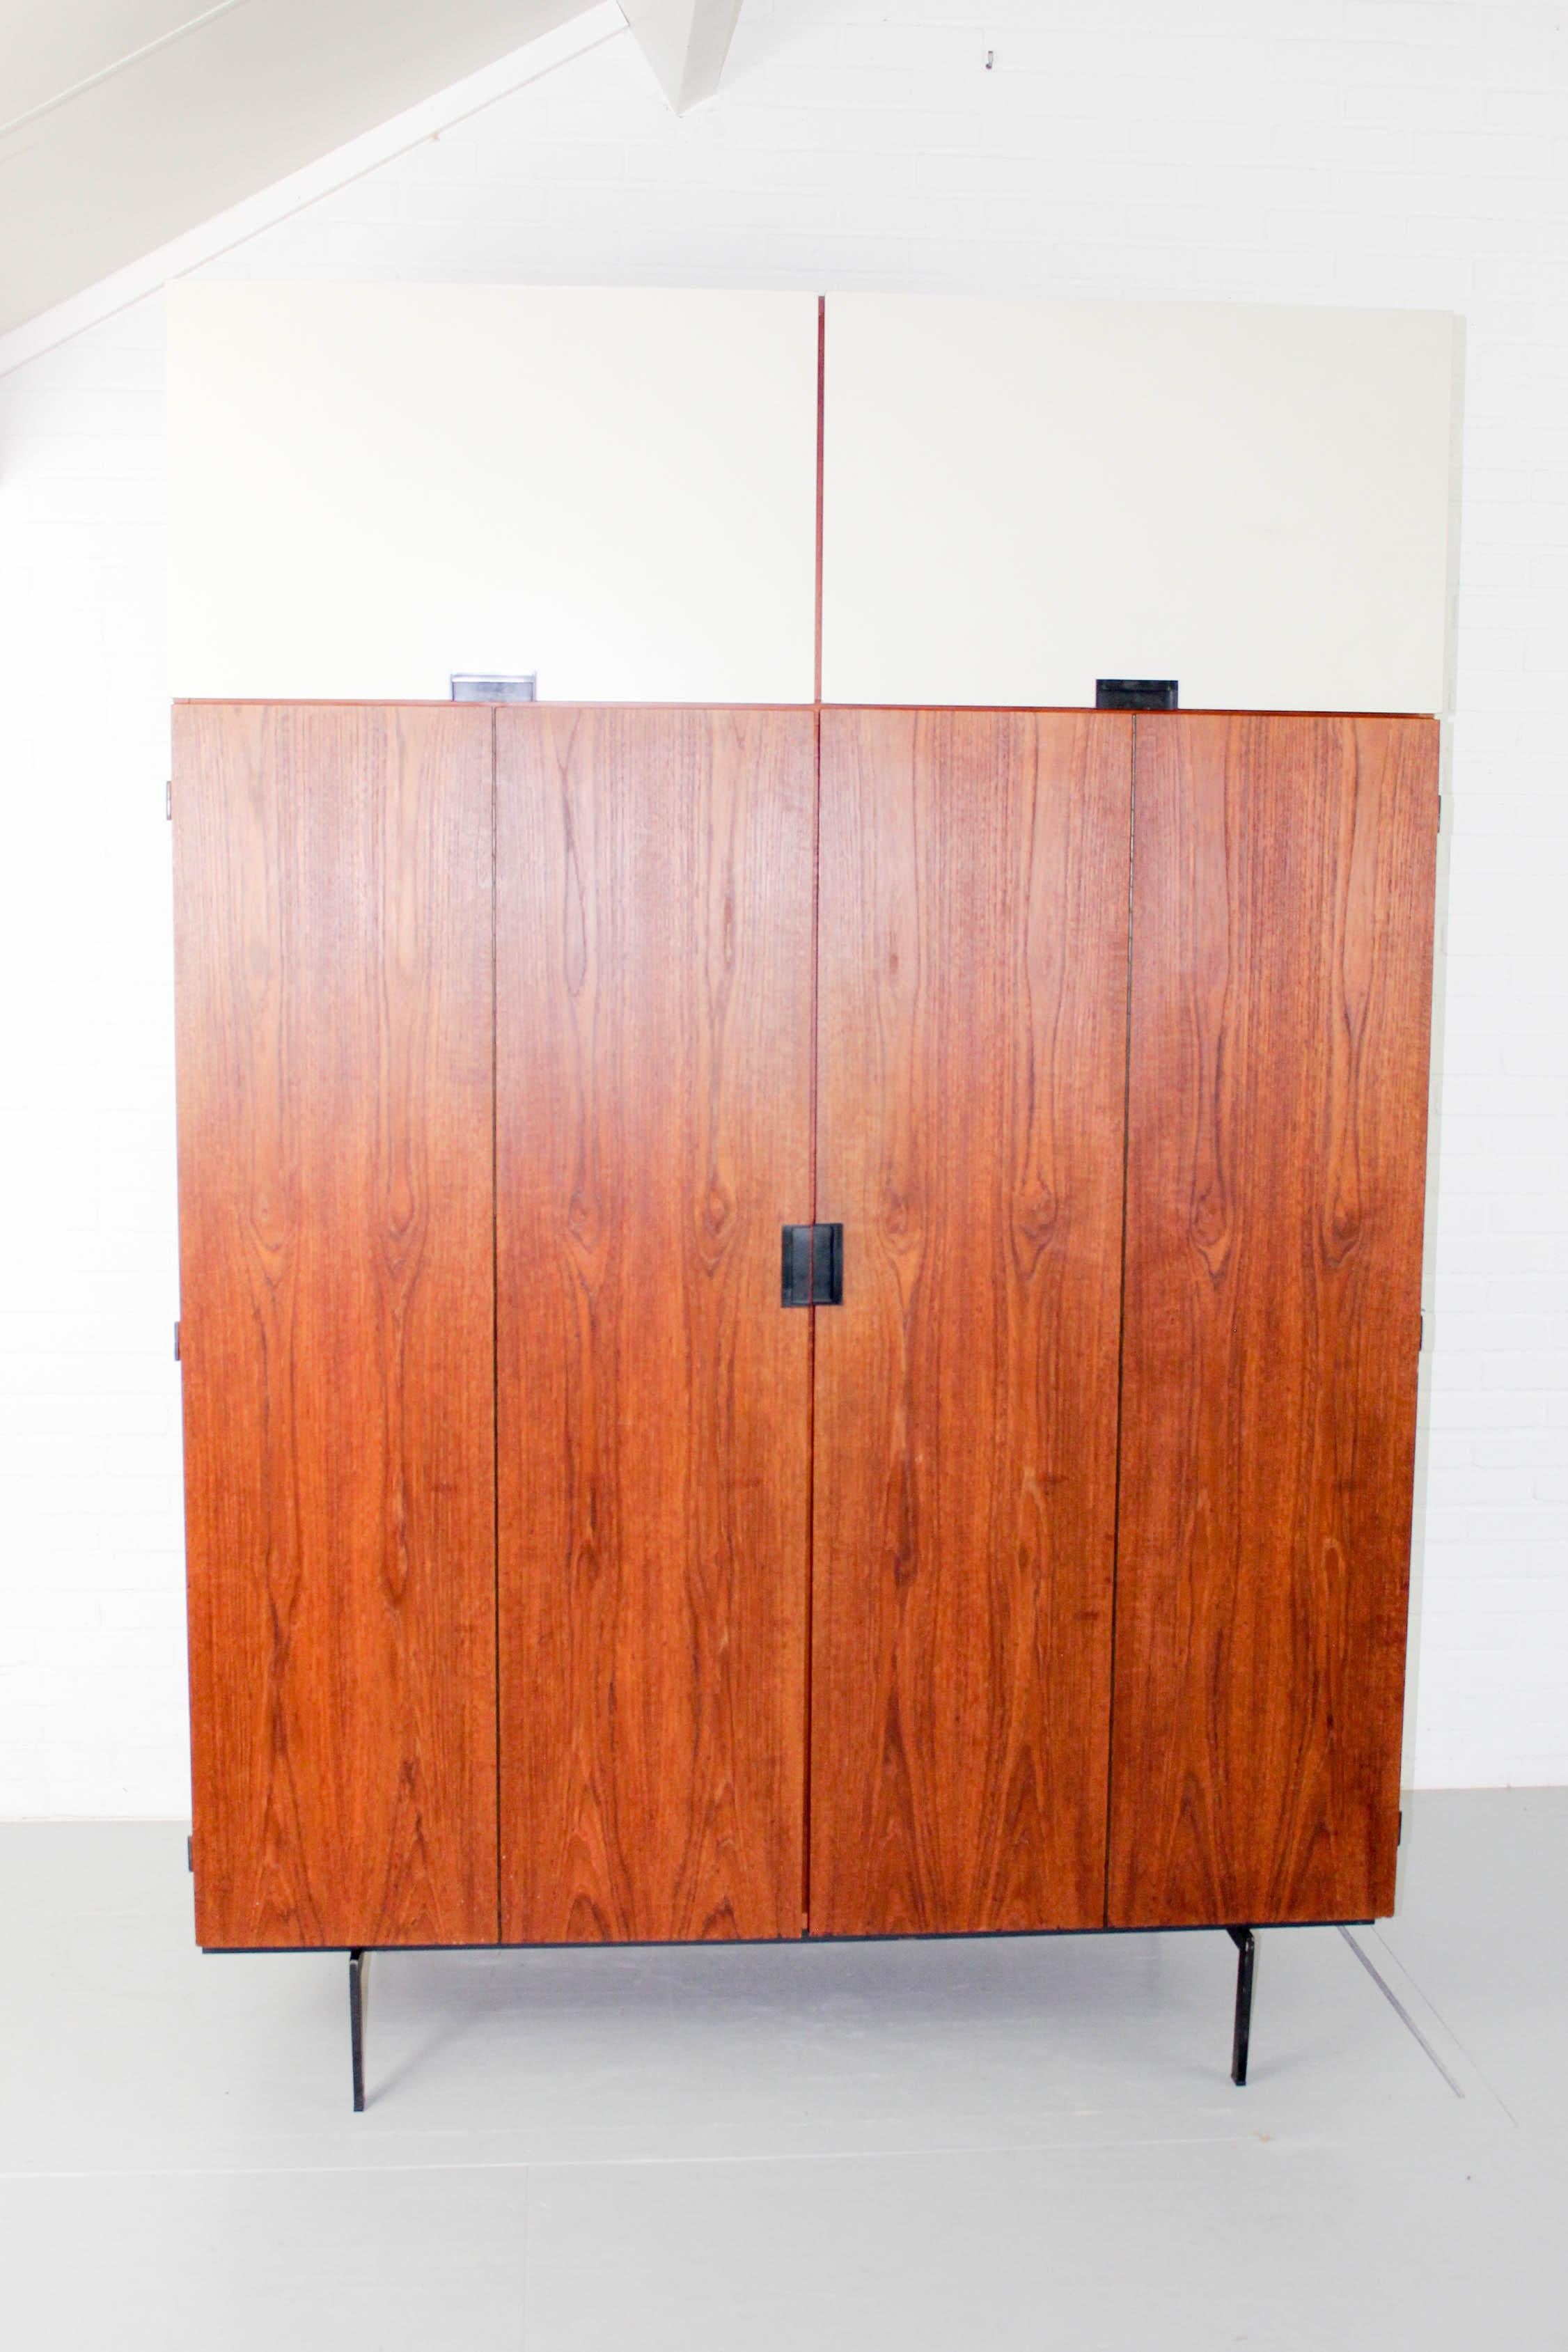 Wardrobe KU15 Cees Braakman Pastoe Japanese series 1960s. It has two doors in teak with an additional folding mechanism, revealing four storage spaces. Iconic square black metal handles make it a piece of very recognizable Japanese series.
 
   